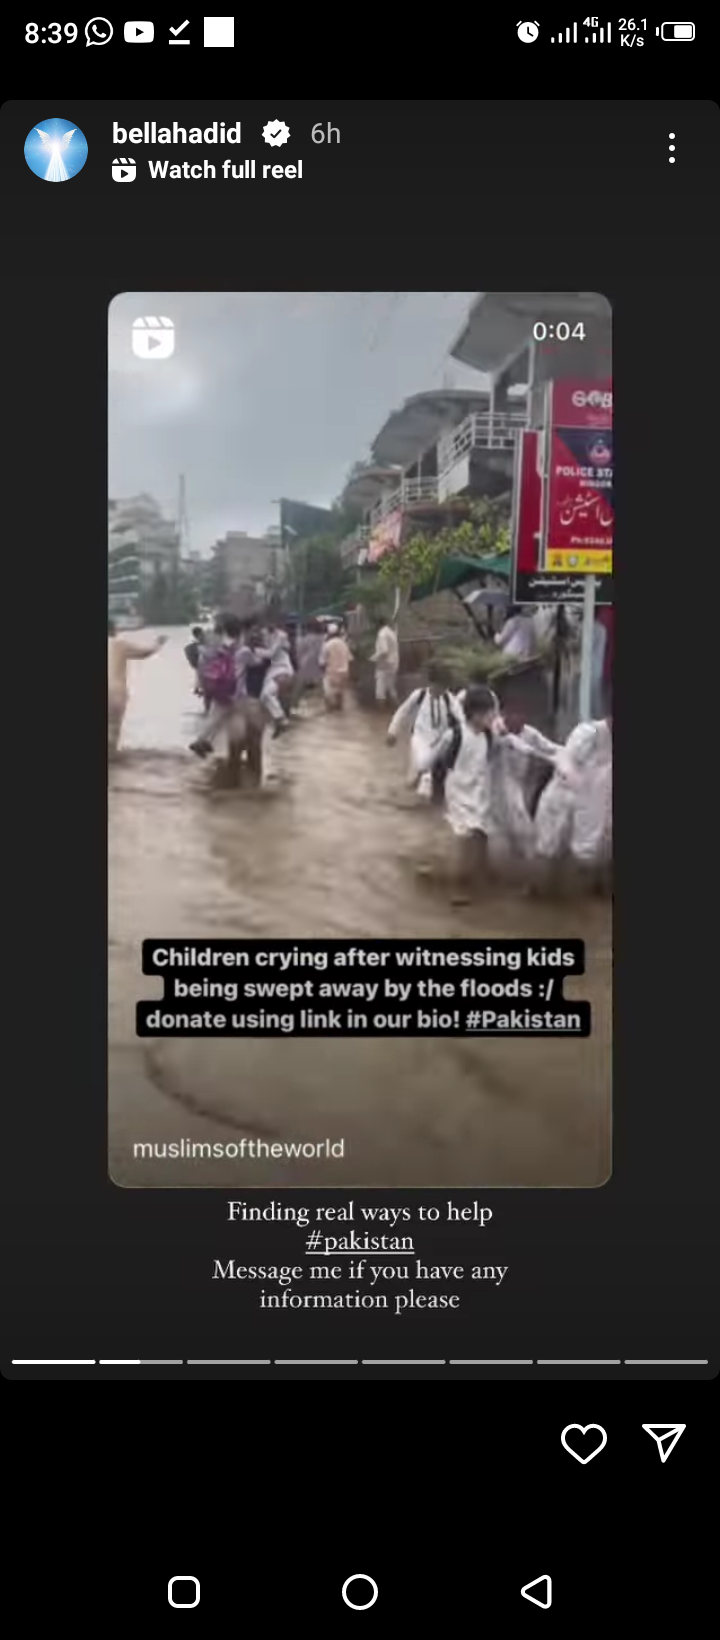 Bella Hadid says she is finding real ways to help Pakistan amid floods